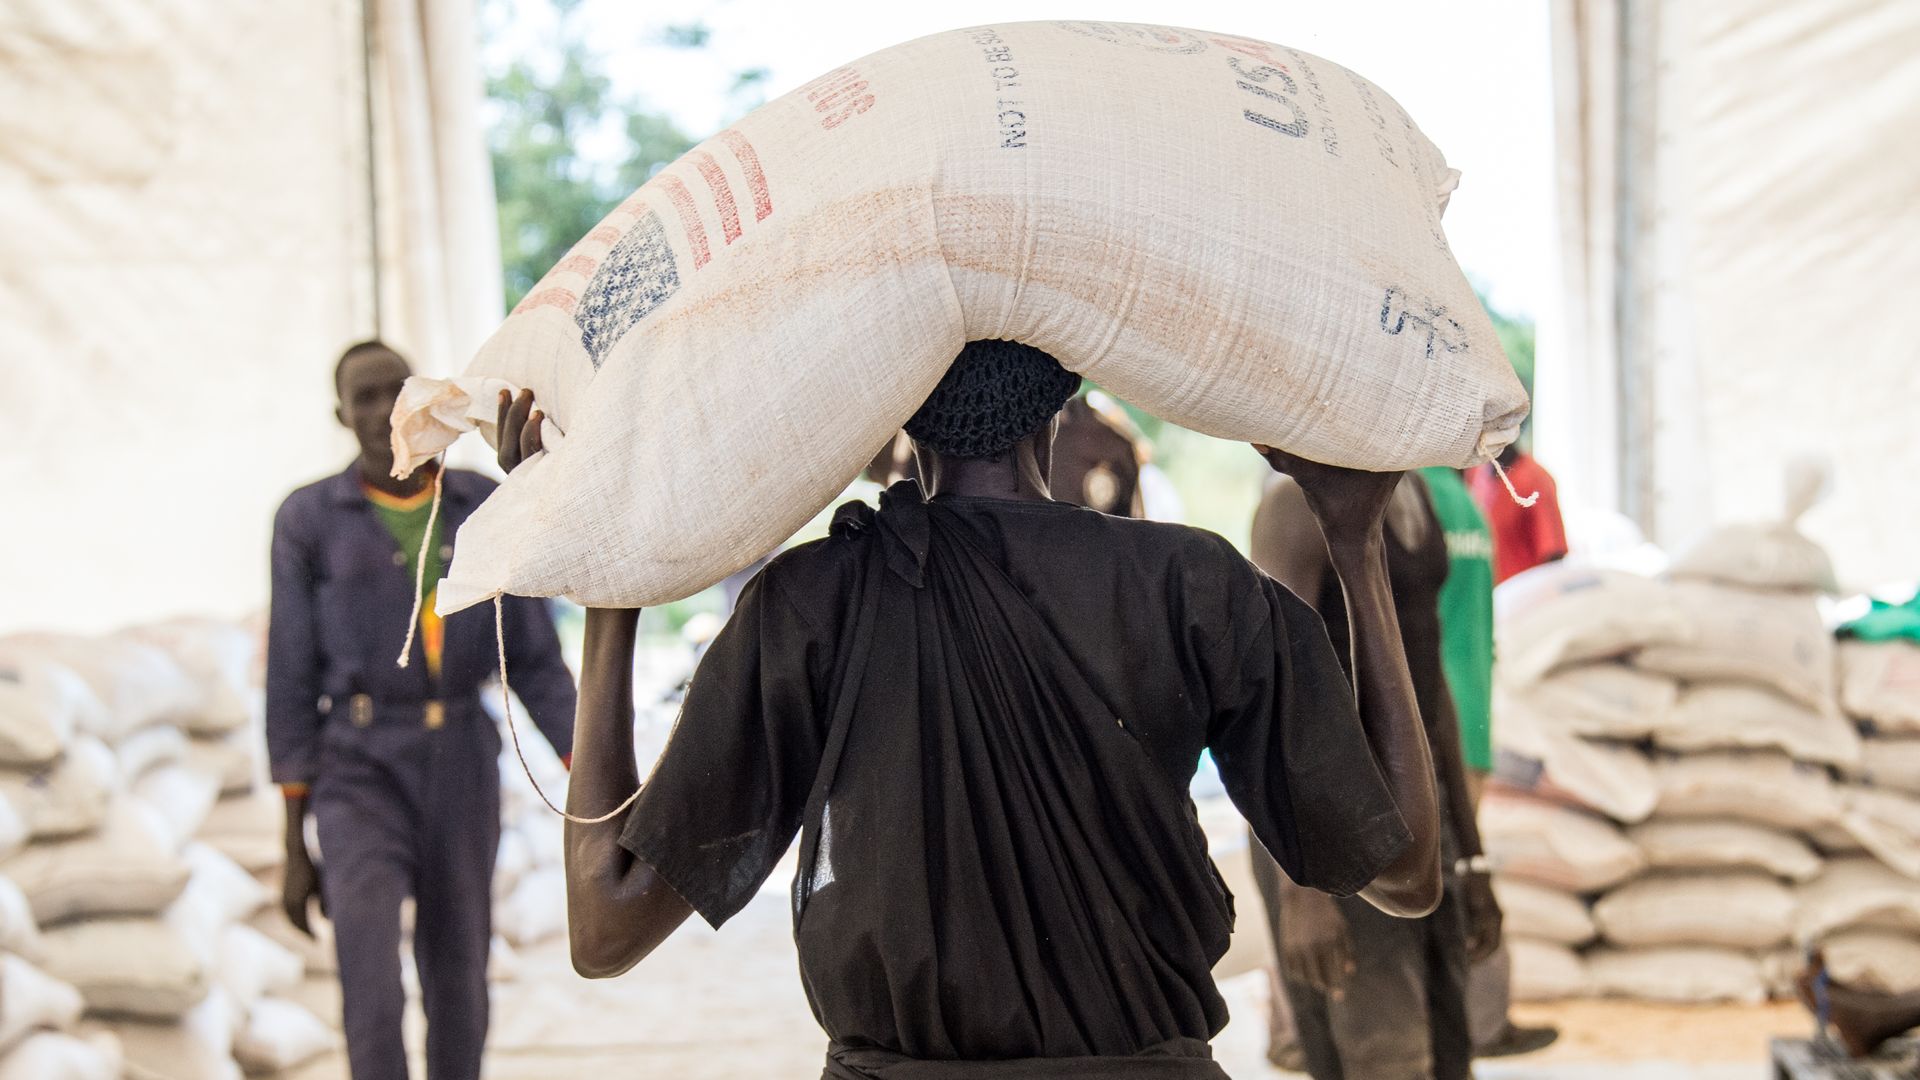 A person carries a USAID food supply bag in South Sudan.